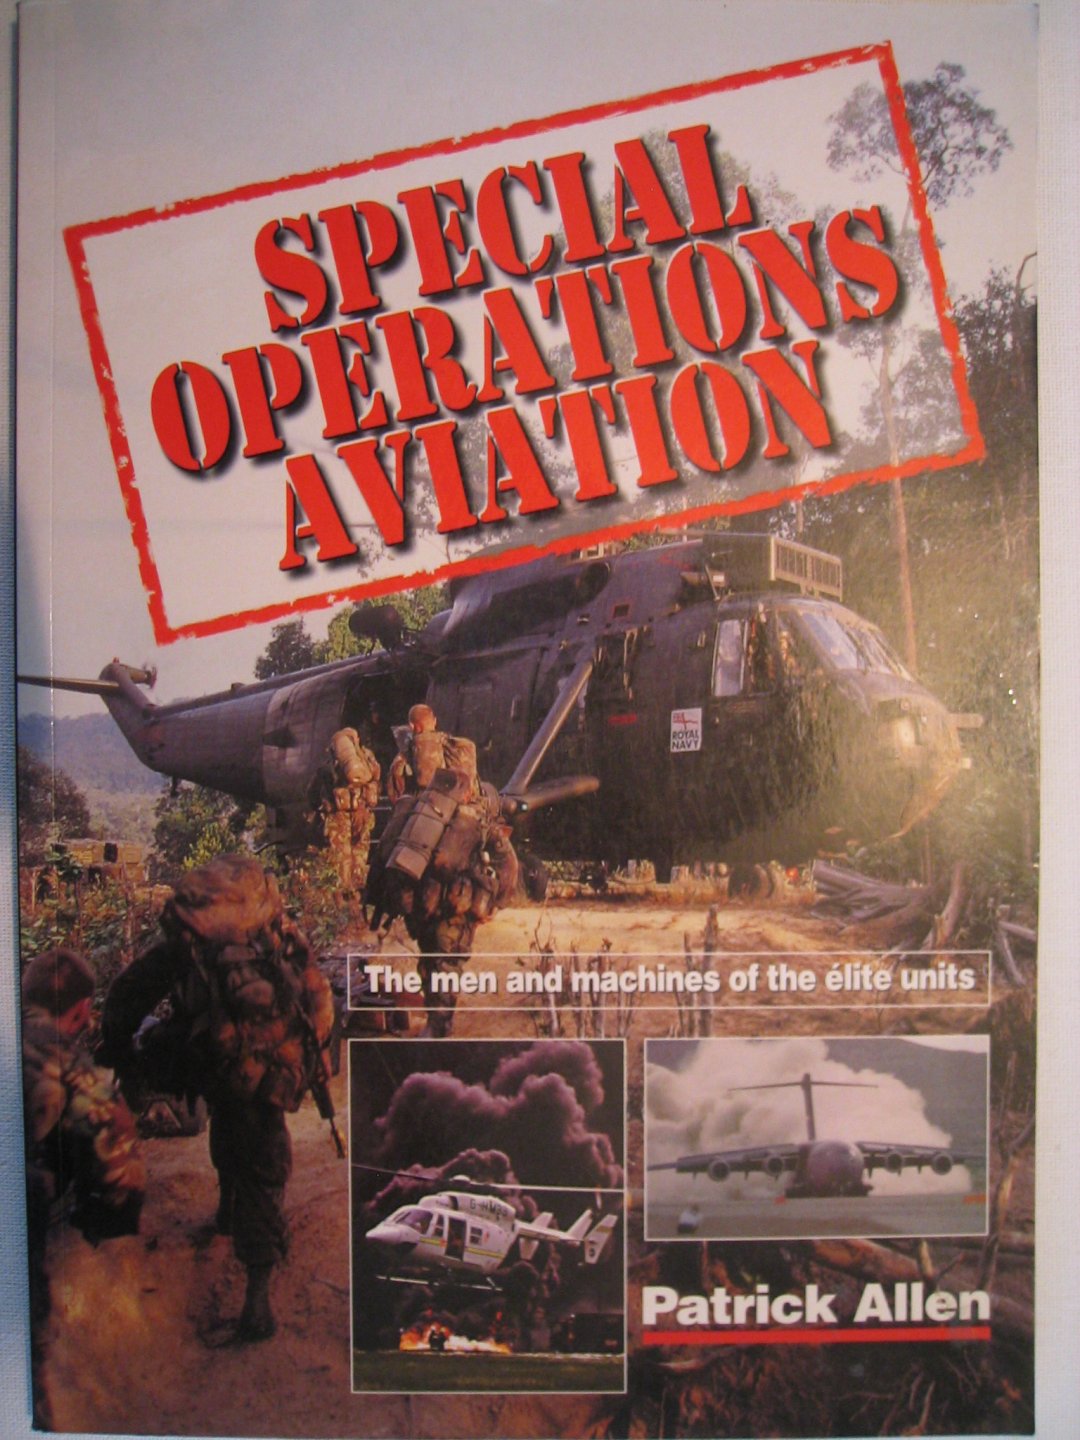 Allen, Patrick - Special Operations Aviation - The men and machines of elite units.